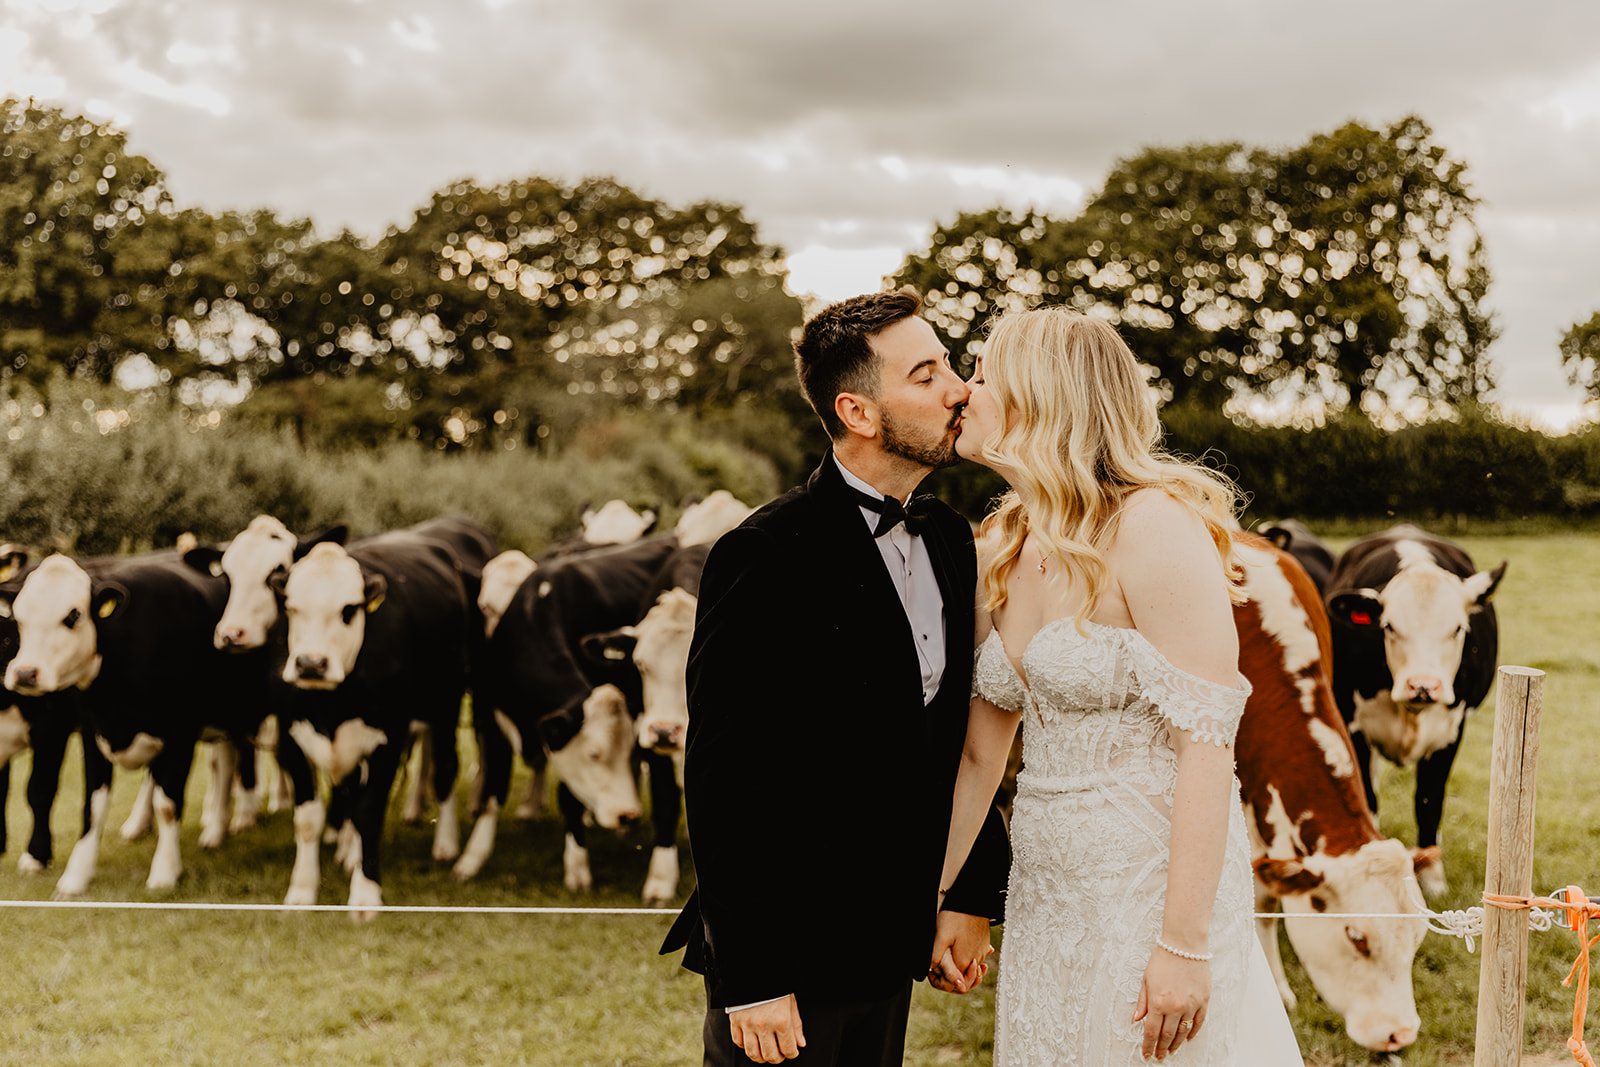 Bride and Groom with cows at a Southlands barn wedding, Sussex. Photo by OliveJoy Photography.